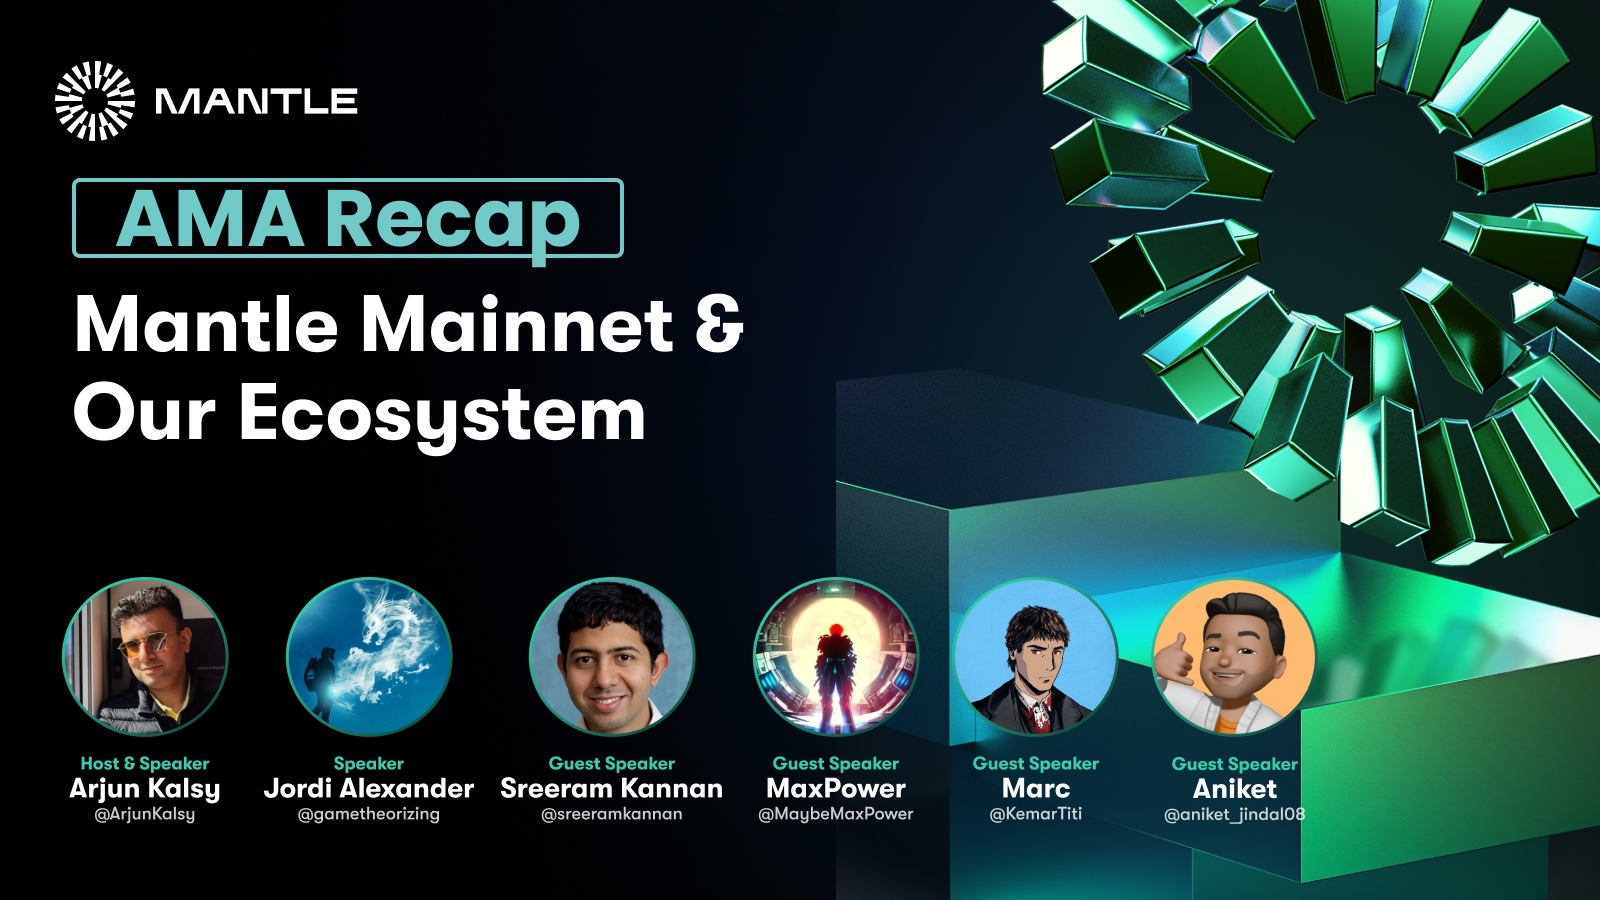 The Arrival of Mantle Mainnet & Our Ecosystem — AMA Recap